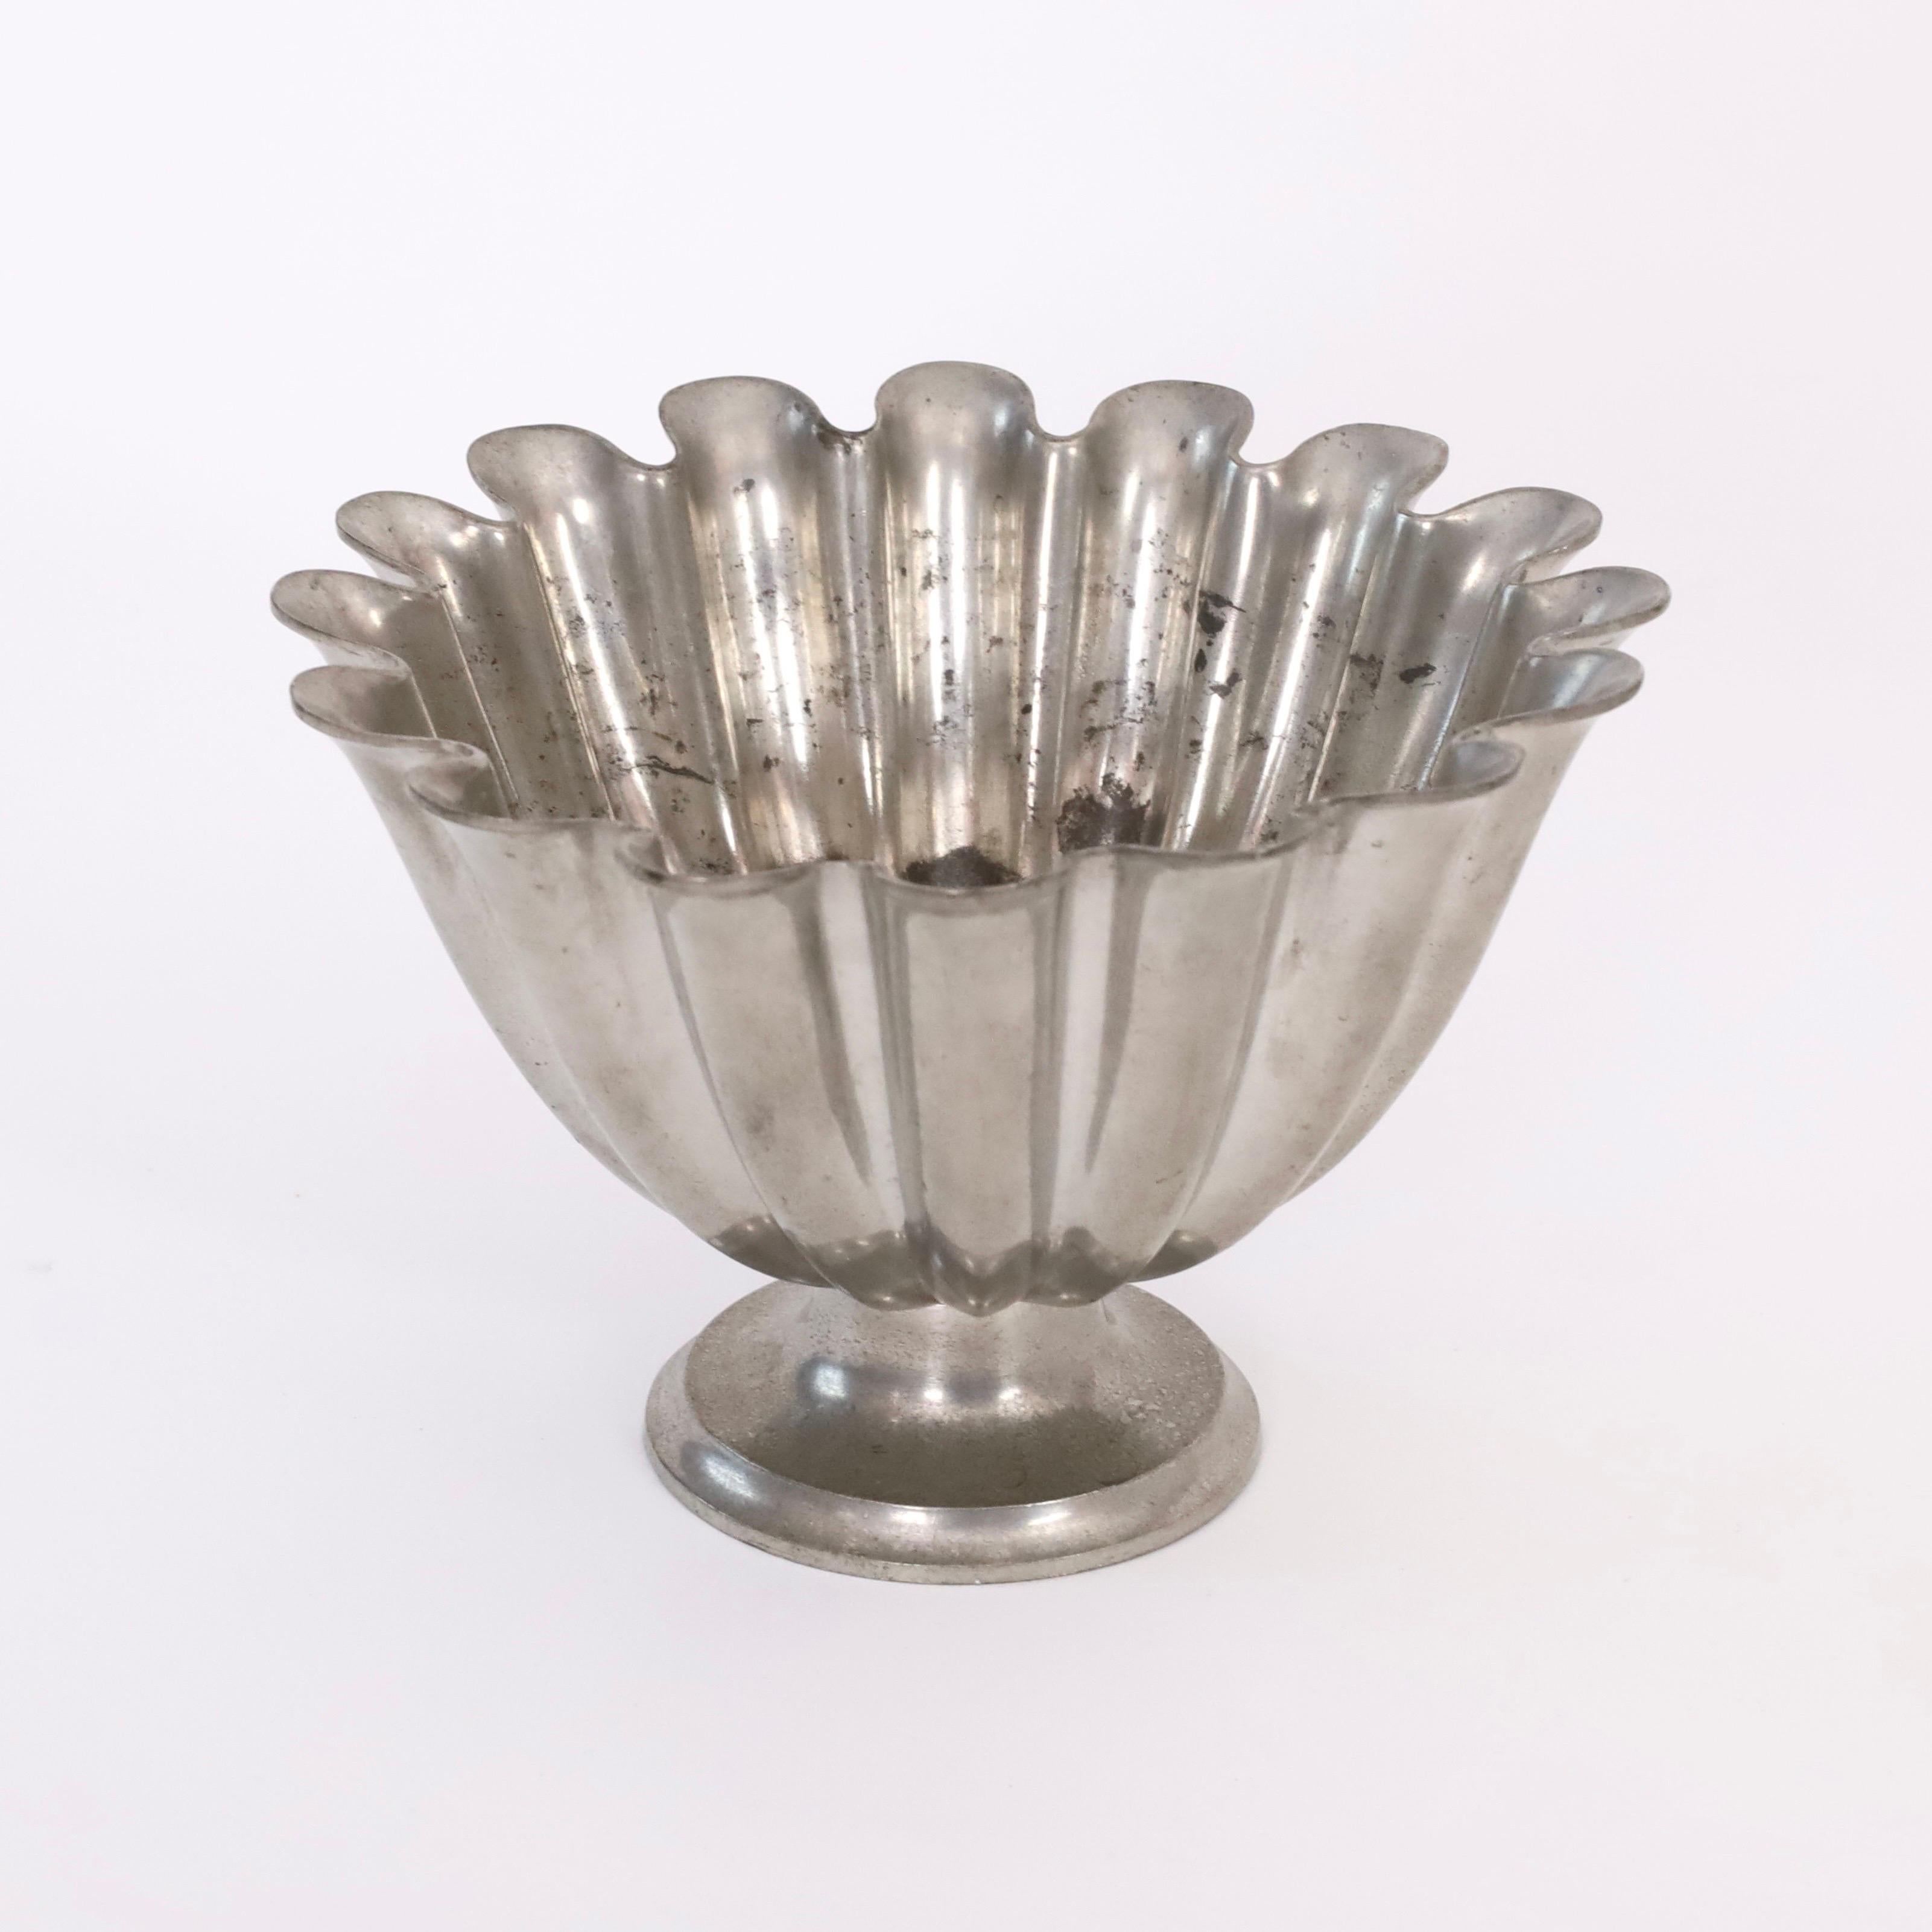 Scalloped pedestal pewter bowl by Just Andersen 1920s, Denmark For Sale 2